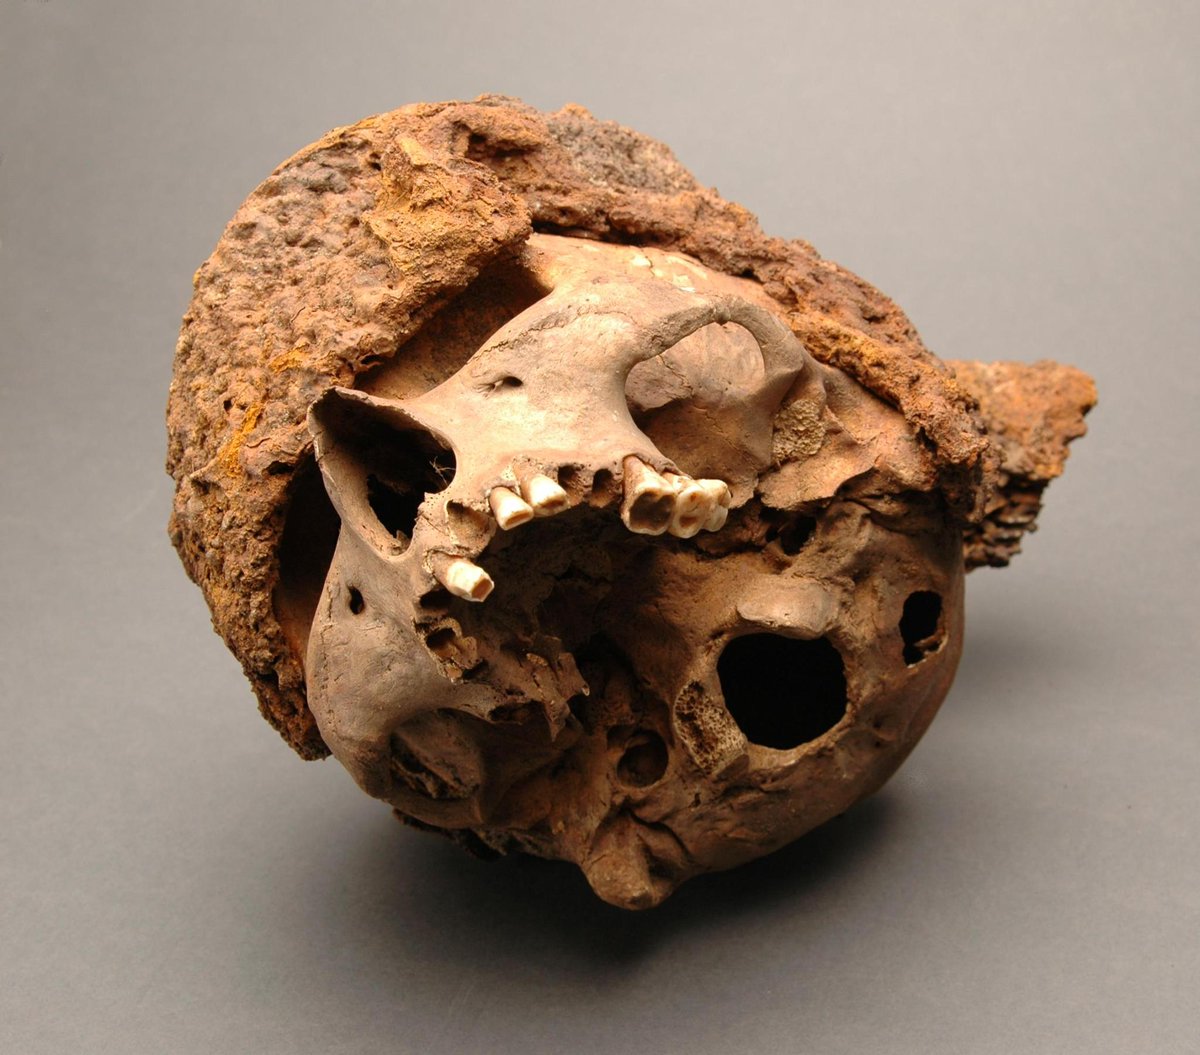 Remnants of a #Maille #Coif fused to the skull of a soldier killed at the battle of Visby on July 27th, 1361. Osteological estimates place this man between the ages of 30 and 35. Recovered from Mass Grave 2 near #Visby, #Gotland, housed at the @historiskamuse